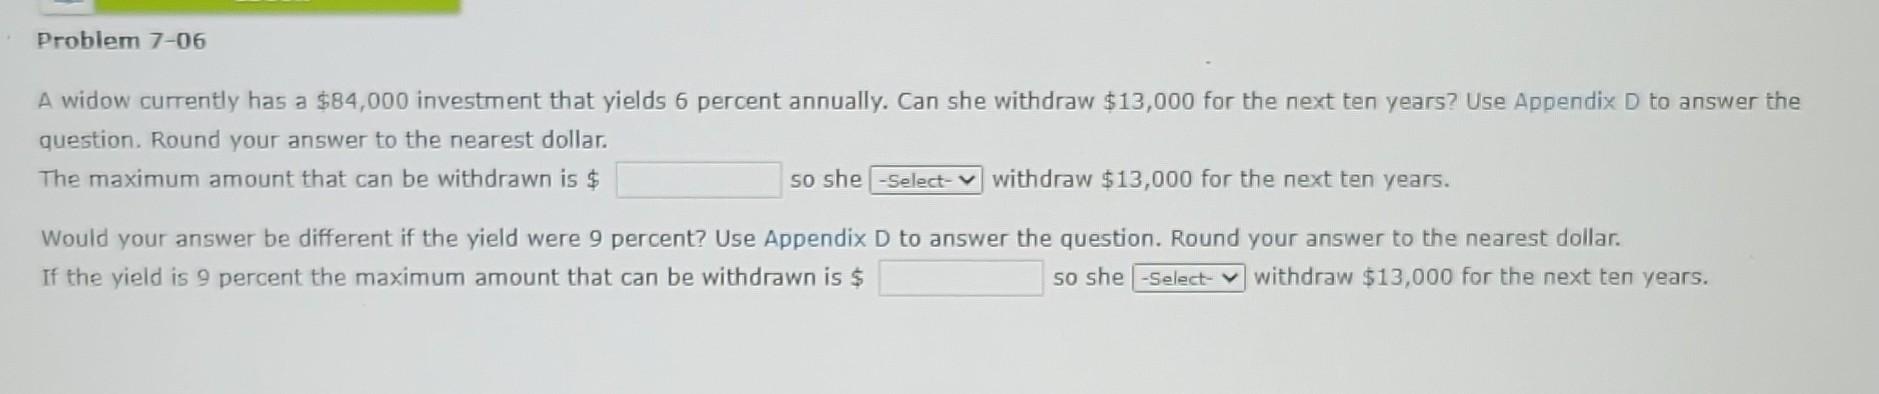 Problem 7-06 A widow currently has a $84,000 investment that yields 6 percent annually. Can she withdraw